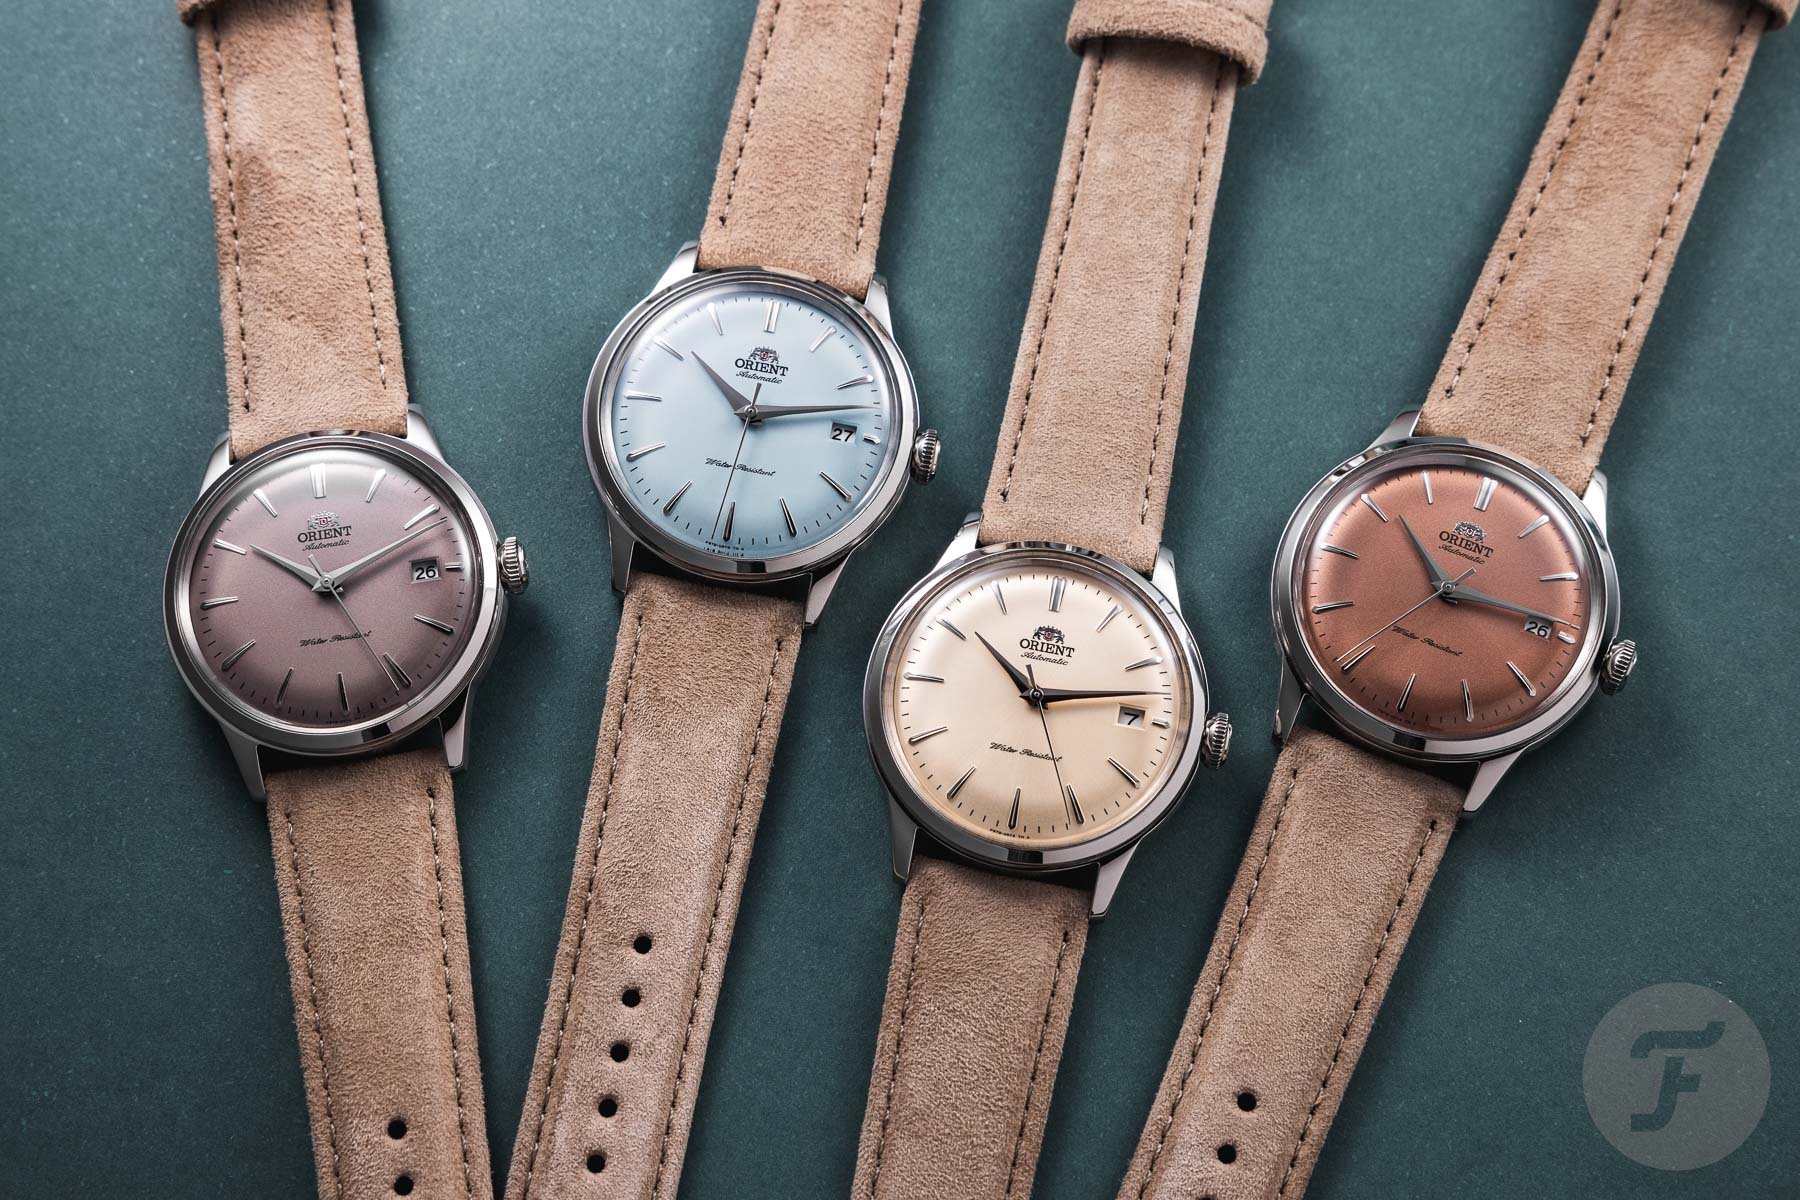 The Orient Bambino 38 Collection offers some of the best value-for-money